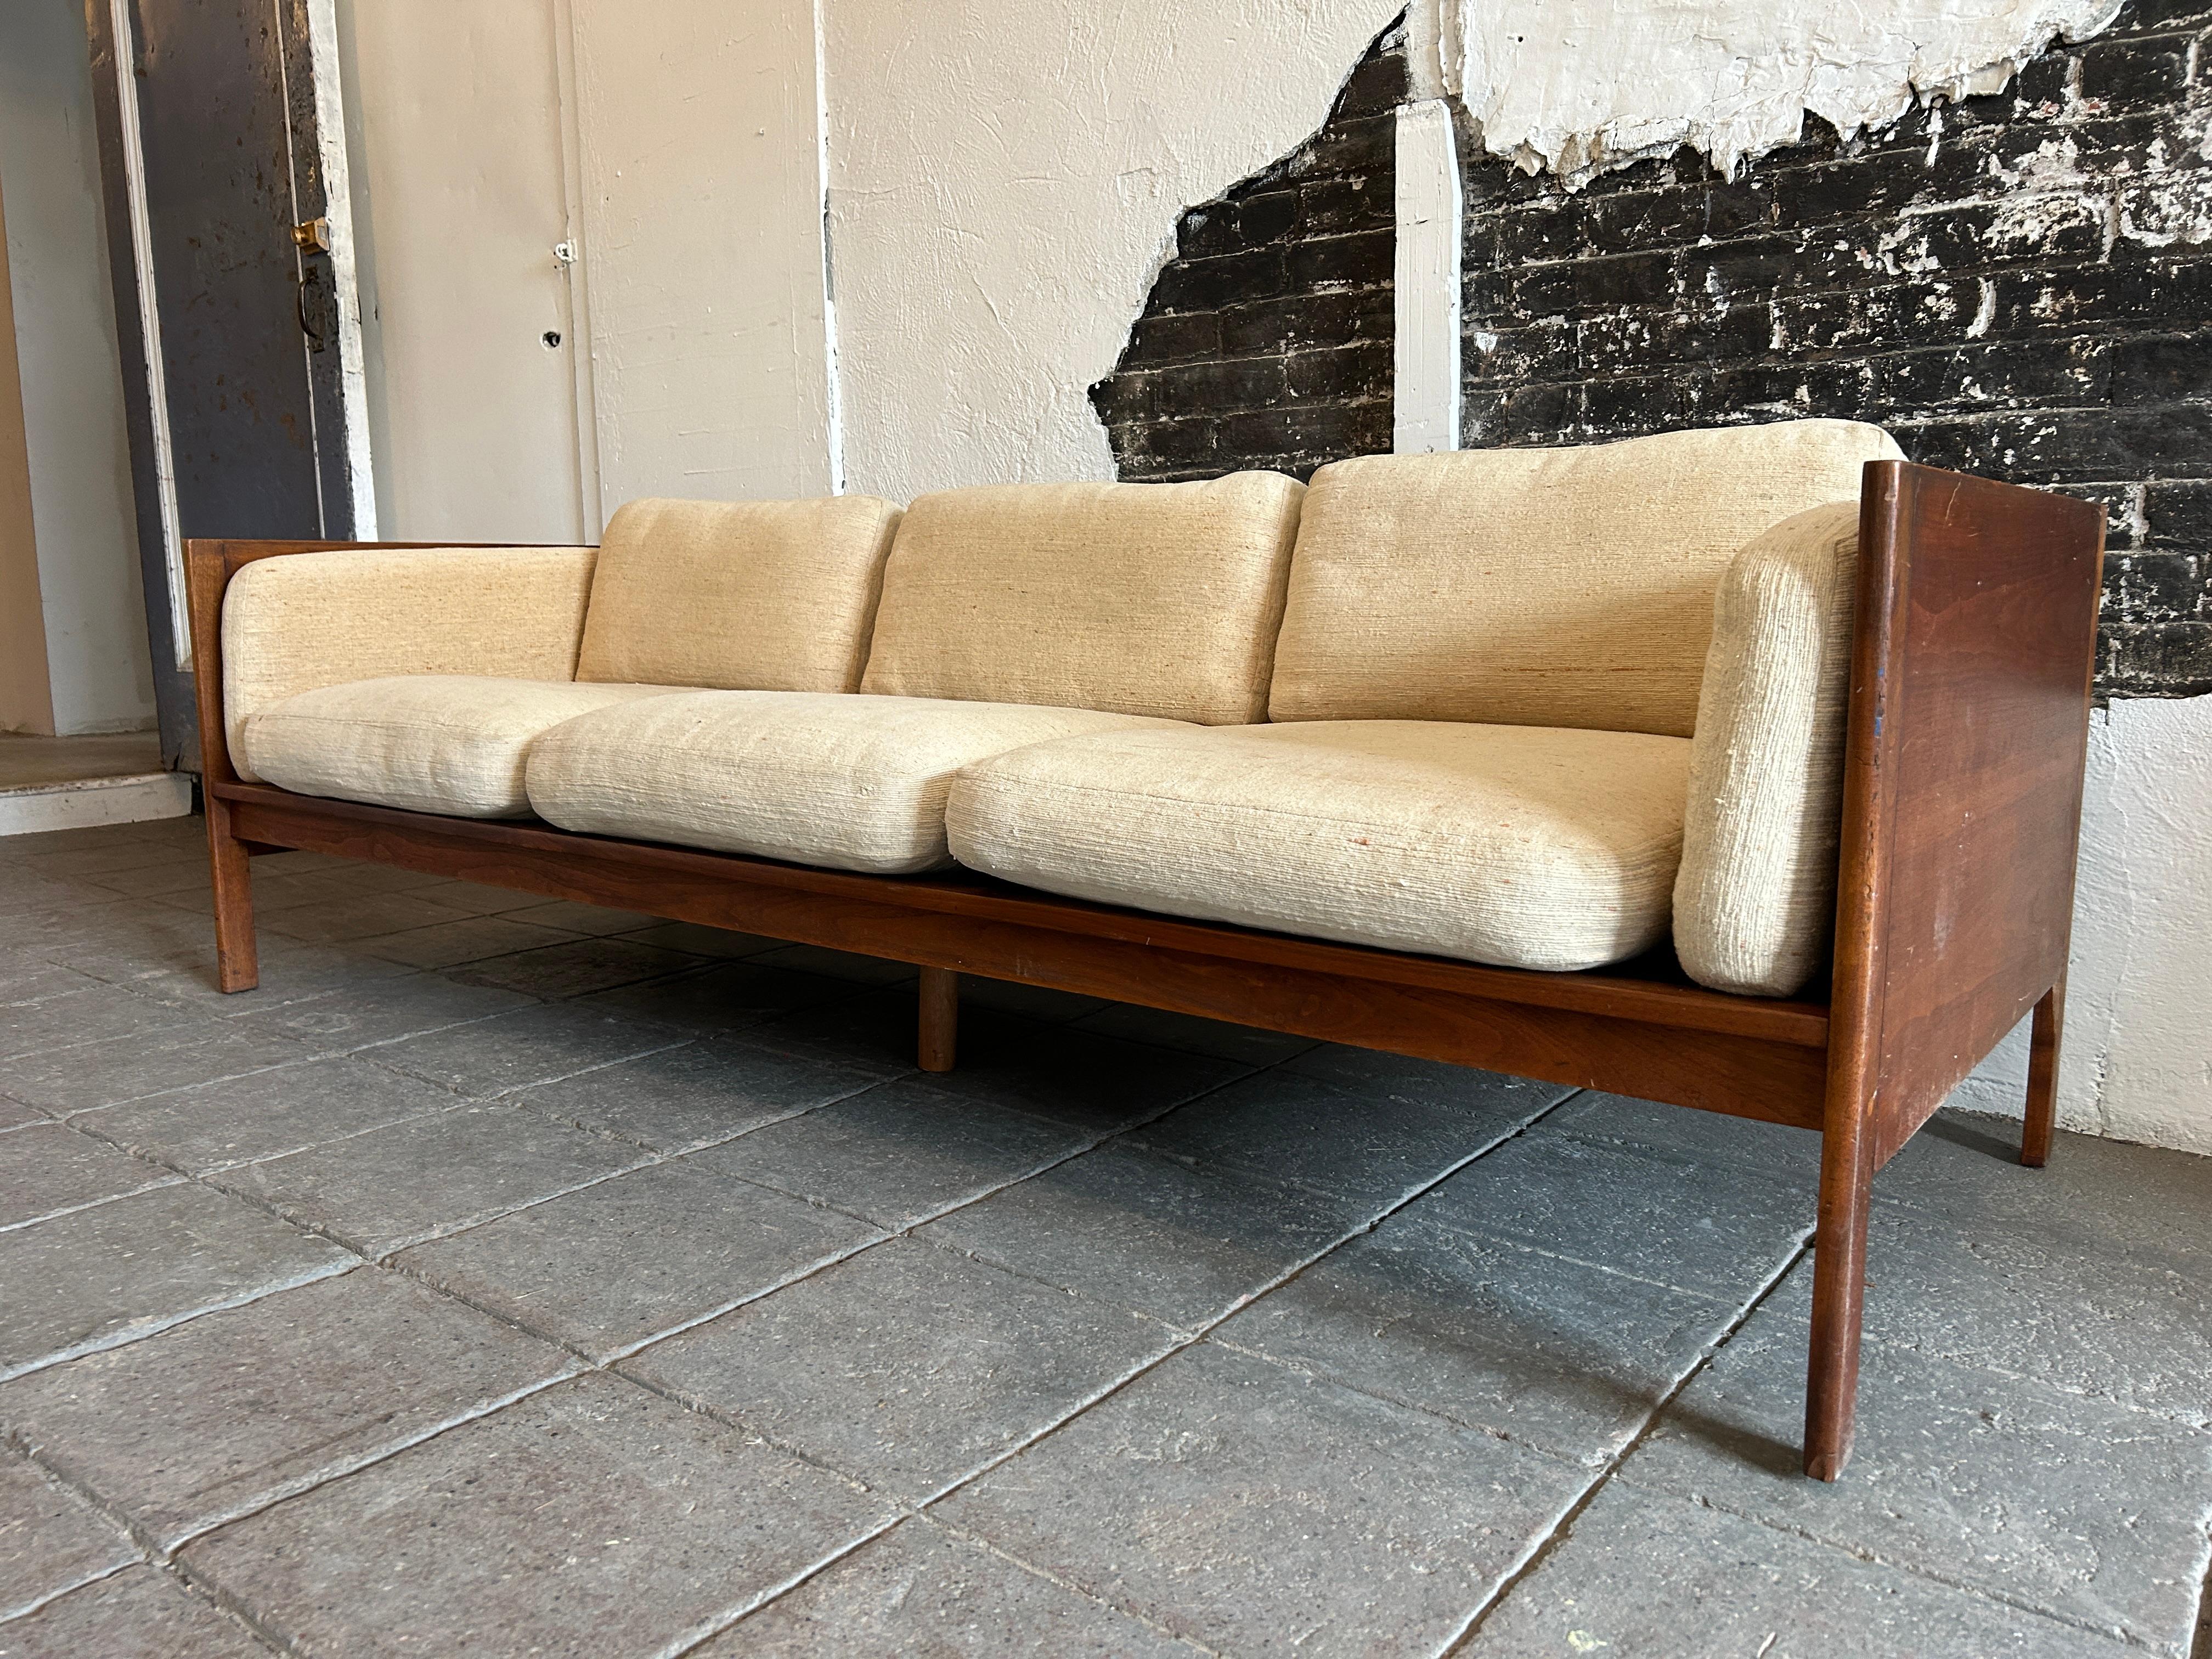 Midcentury Walnut 3 Seat Platform Armed Sofa Daybed by Richard Artschwager In Good Condition For Sale In BROOKLYN, NY